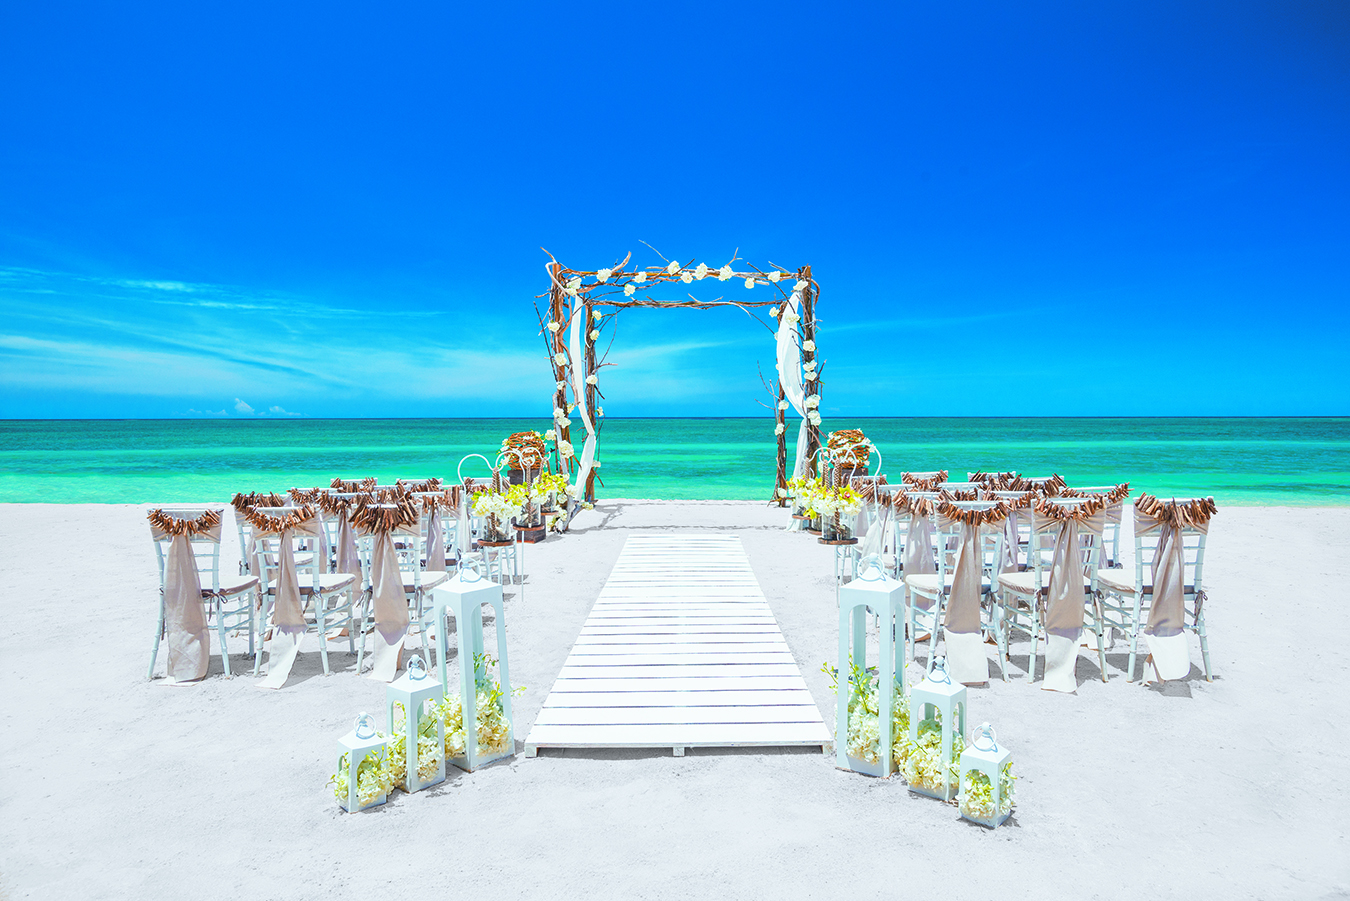 Your 2022 destination wedding is now a whole lot more affordable with all-inclusive brand Sandals Resorts’ new Free Tropical Wedding package.